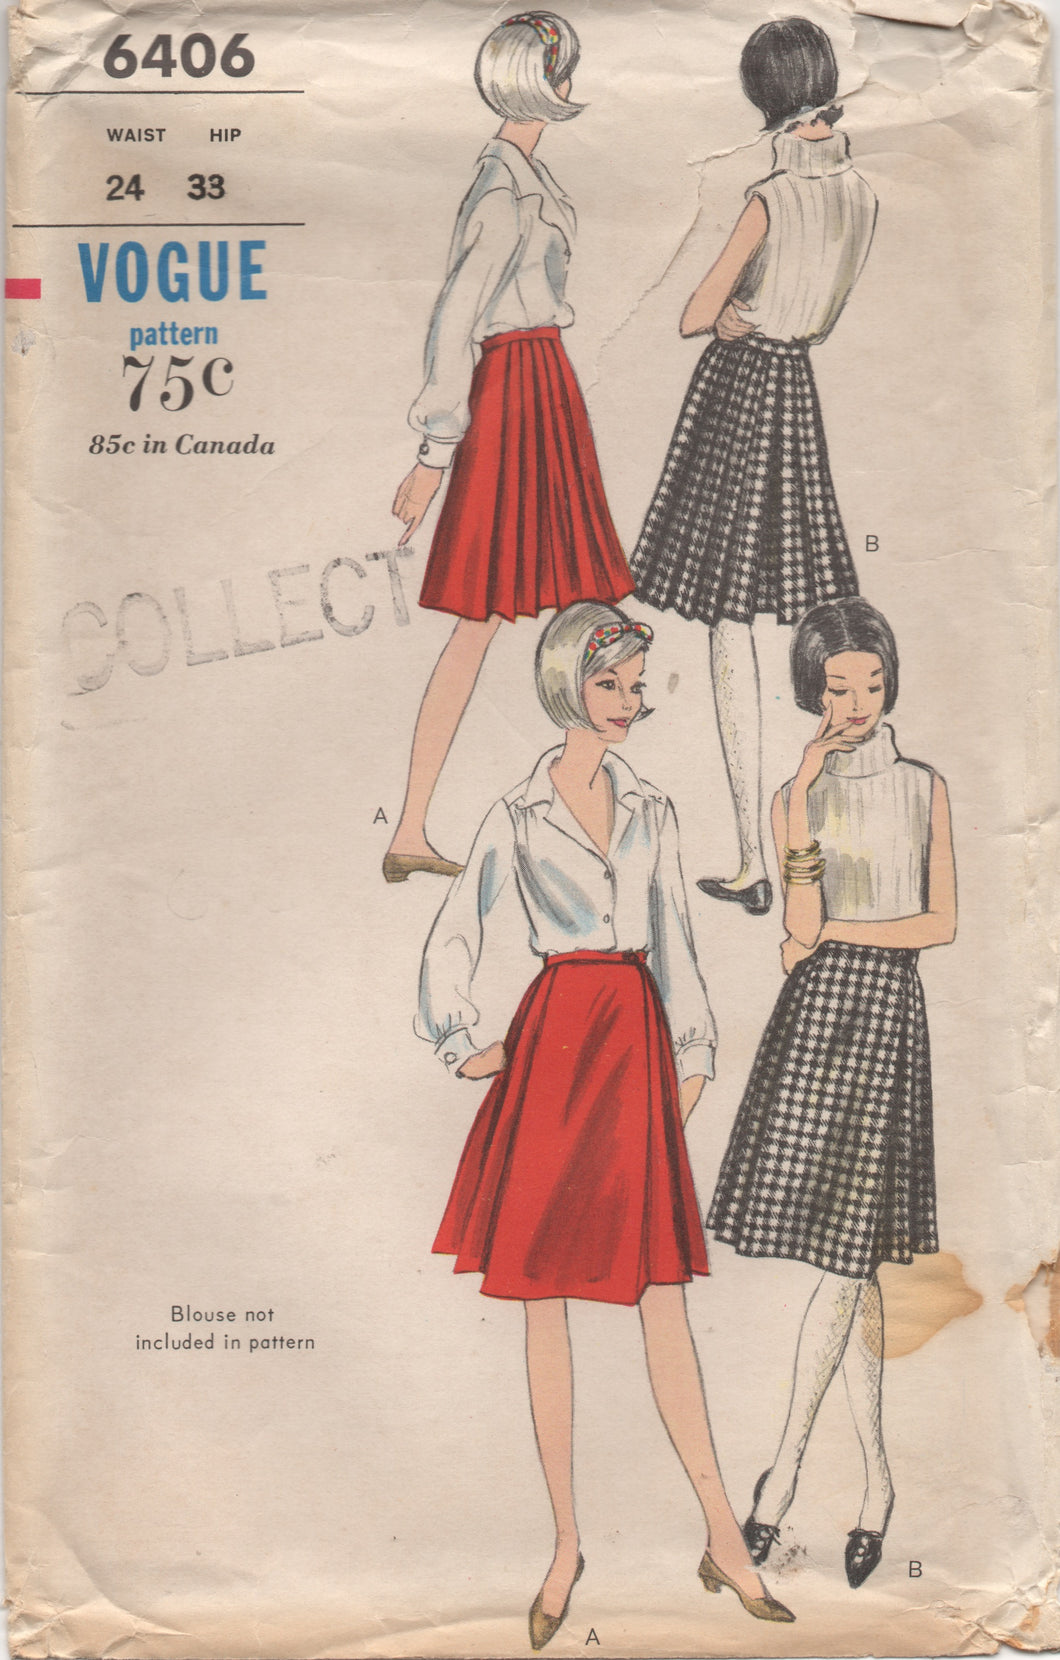 1960's Vogue Pleated Skirt in Two styles - Waist 24